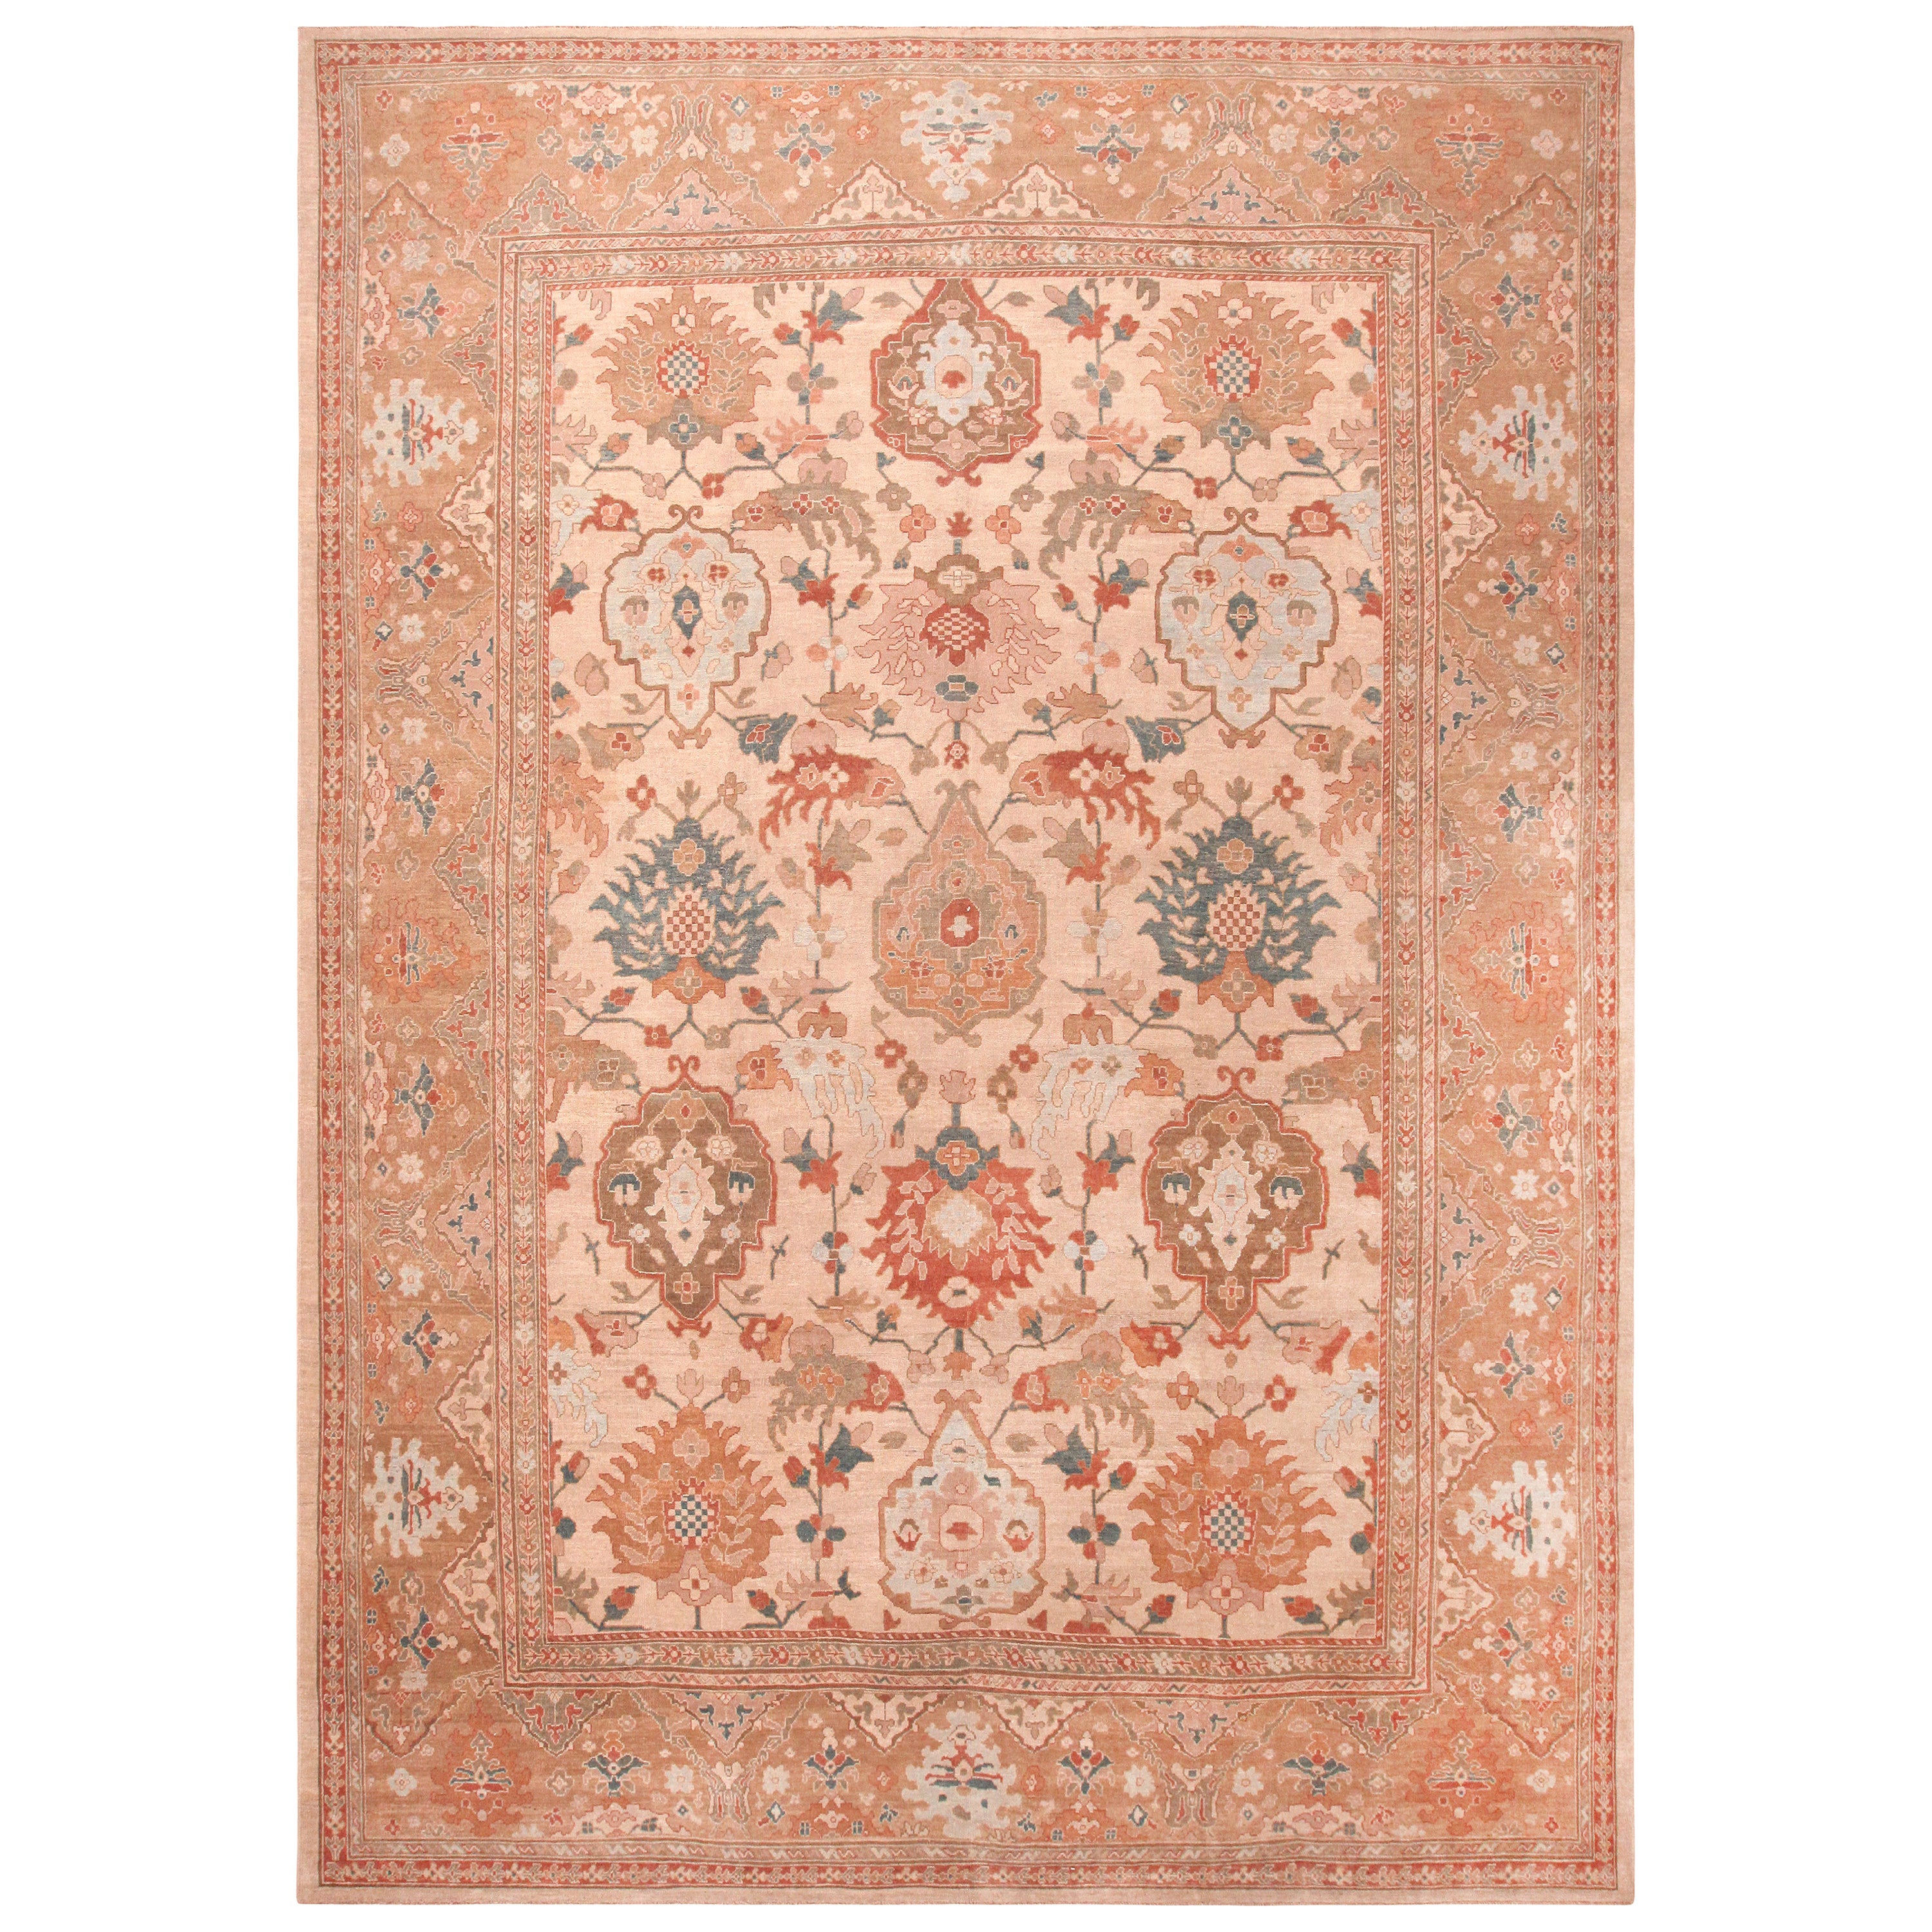 Nazmiyal Collection Large Modern Persian Sultanabad Rug. 12 ft 6 in x 17 ft 6 in For Sale